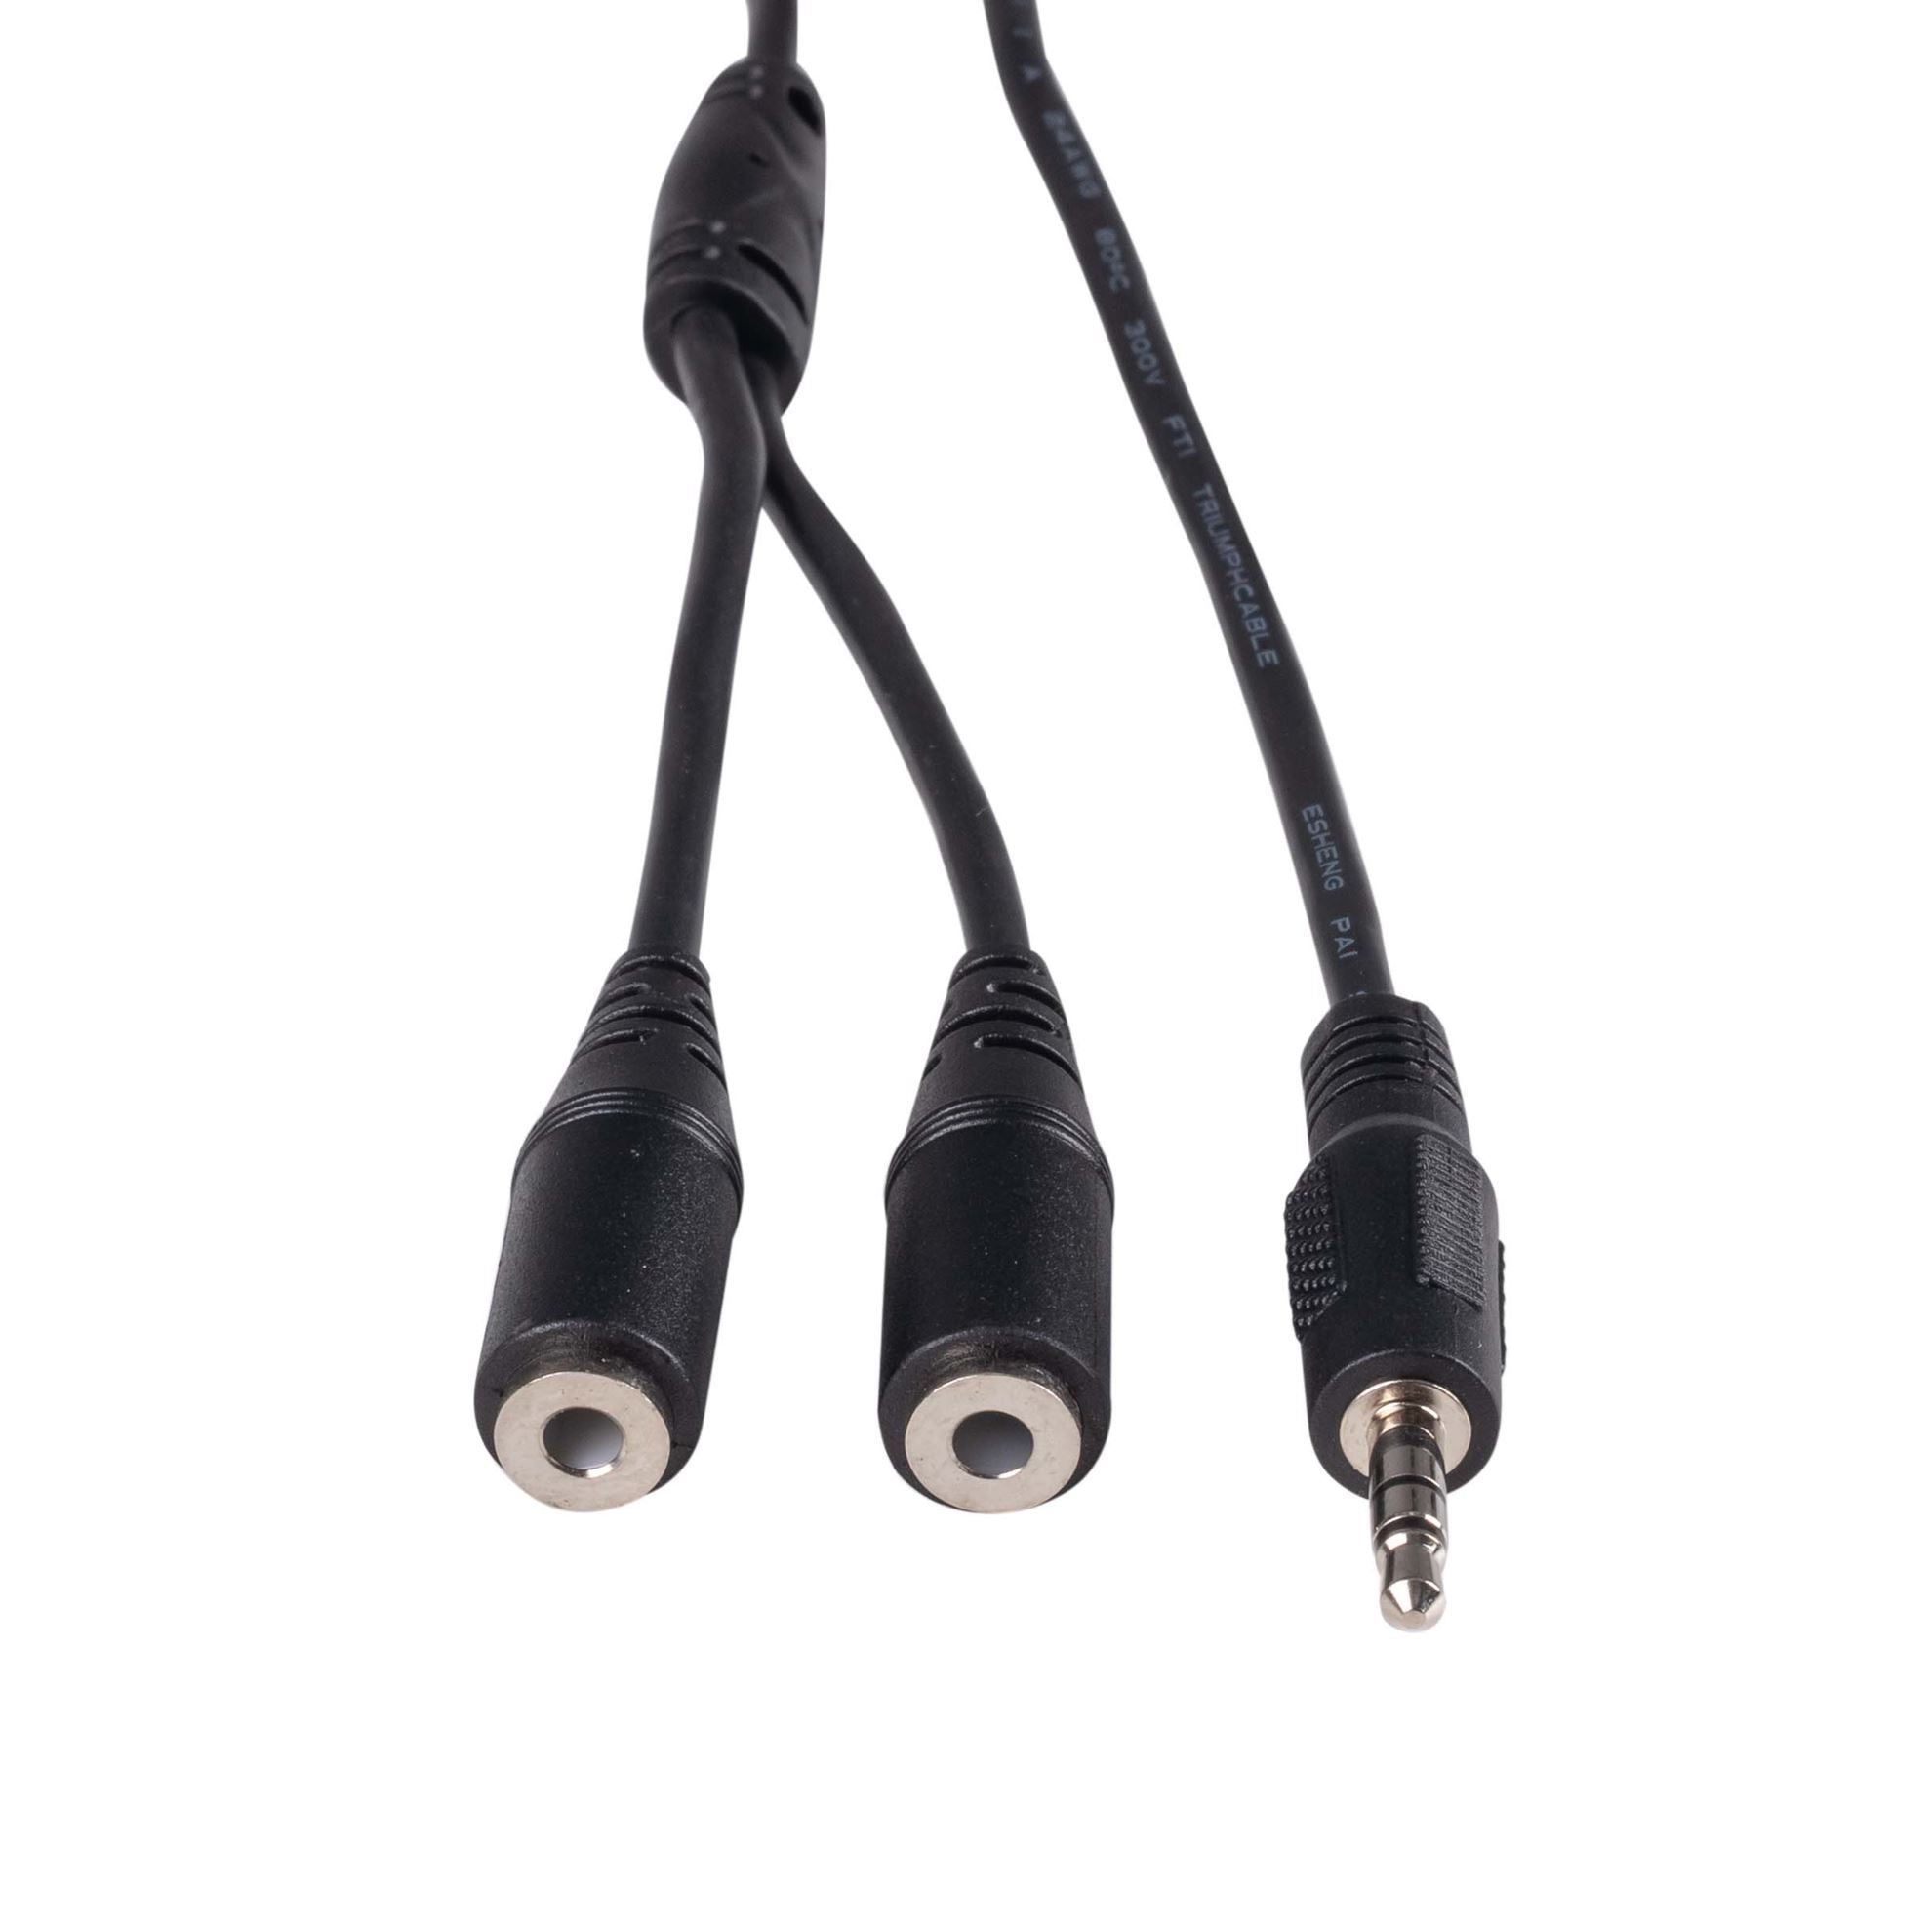 DYNAMIX_0.2m_Stereo_Y_Cable_3.5mm_Plugs 500